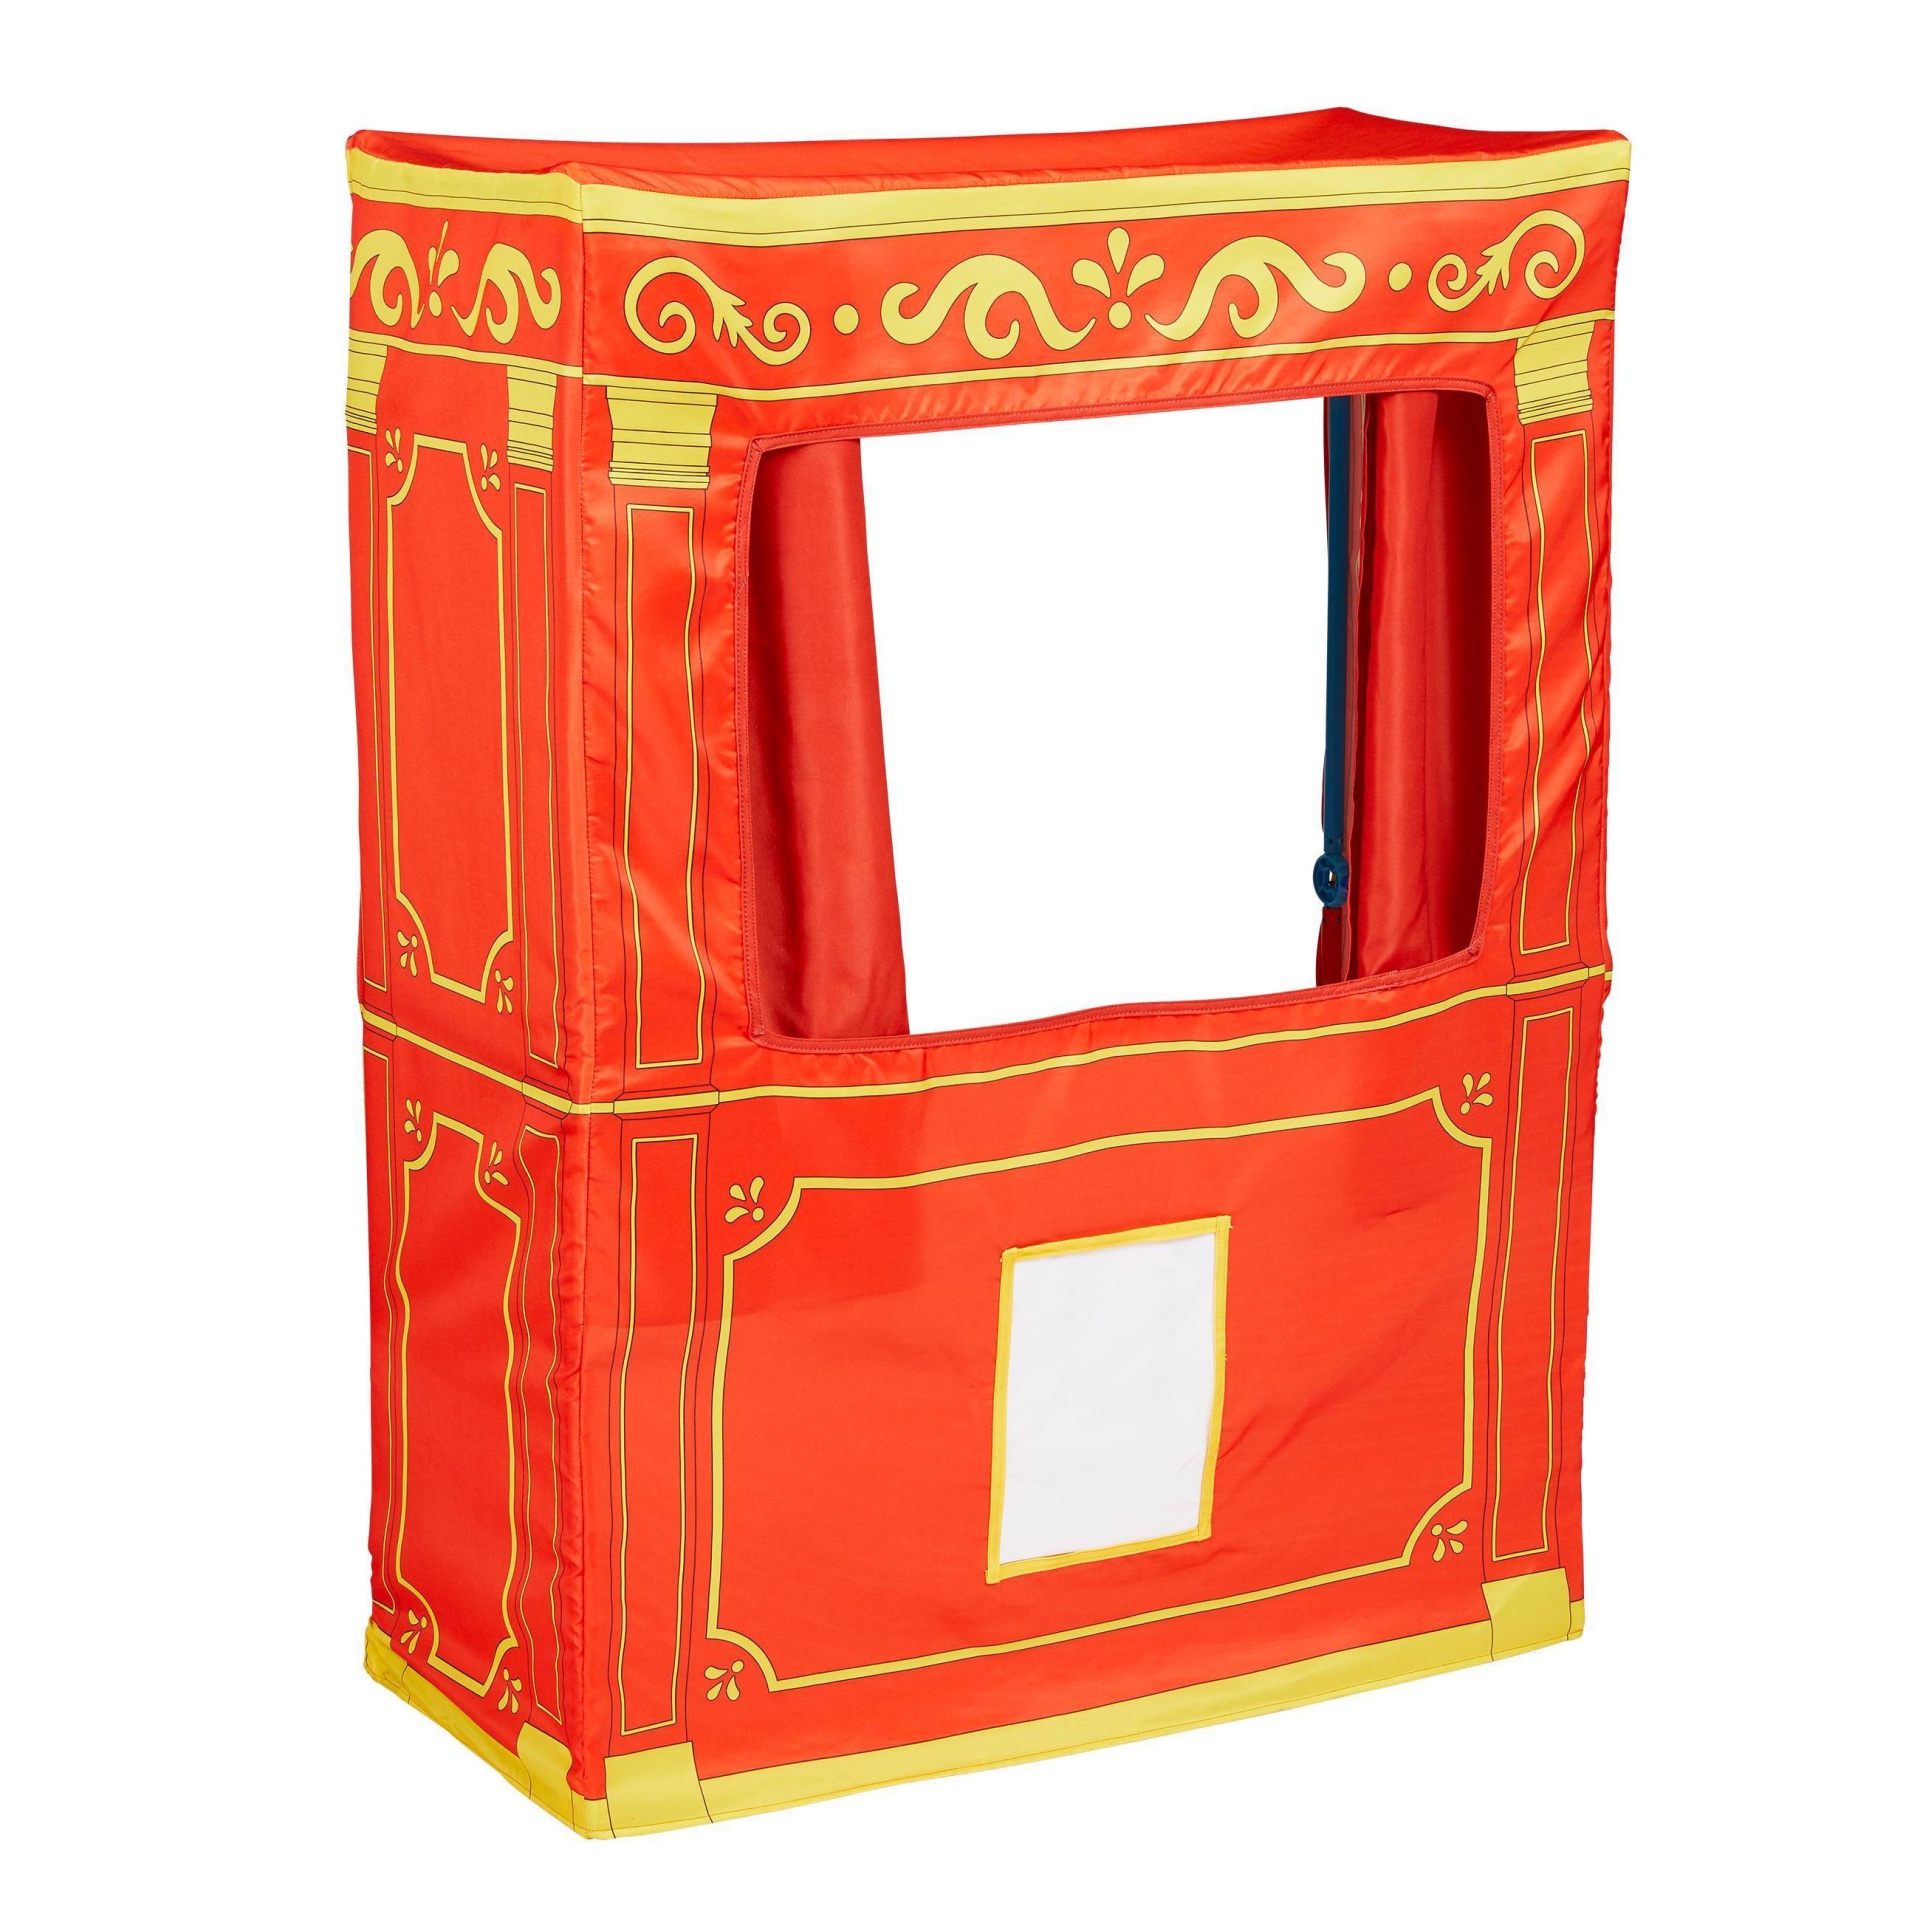 Antsy Pants Build and Play Cover - Puppet Theater 1 ct | Shipt